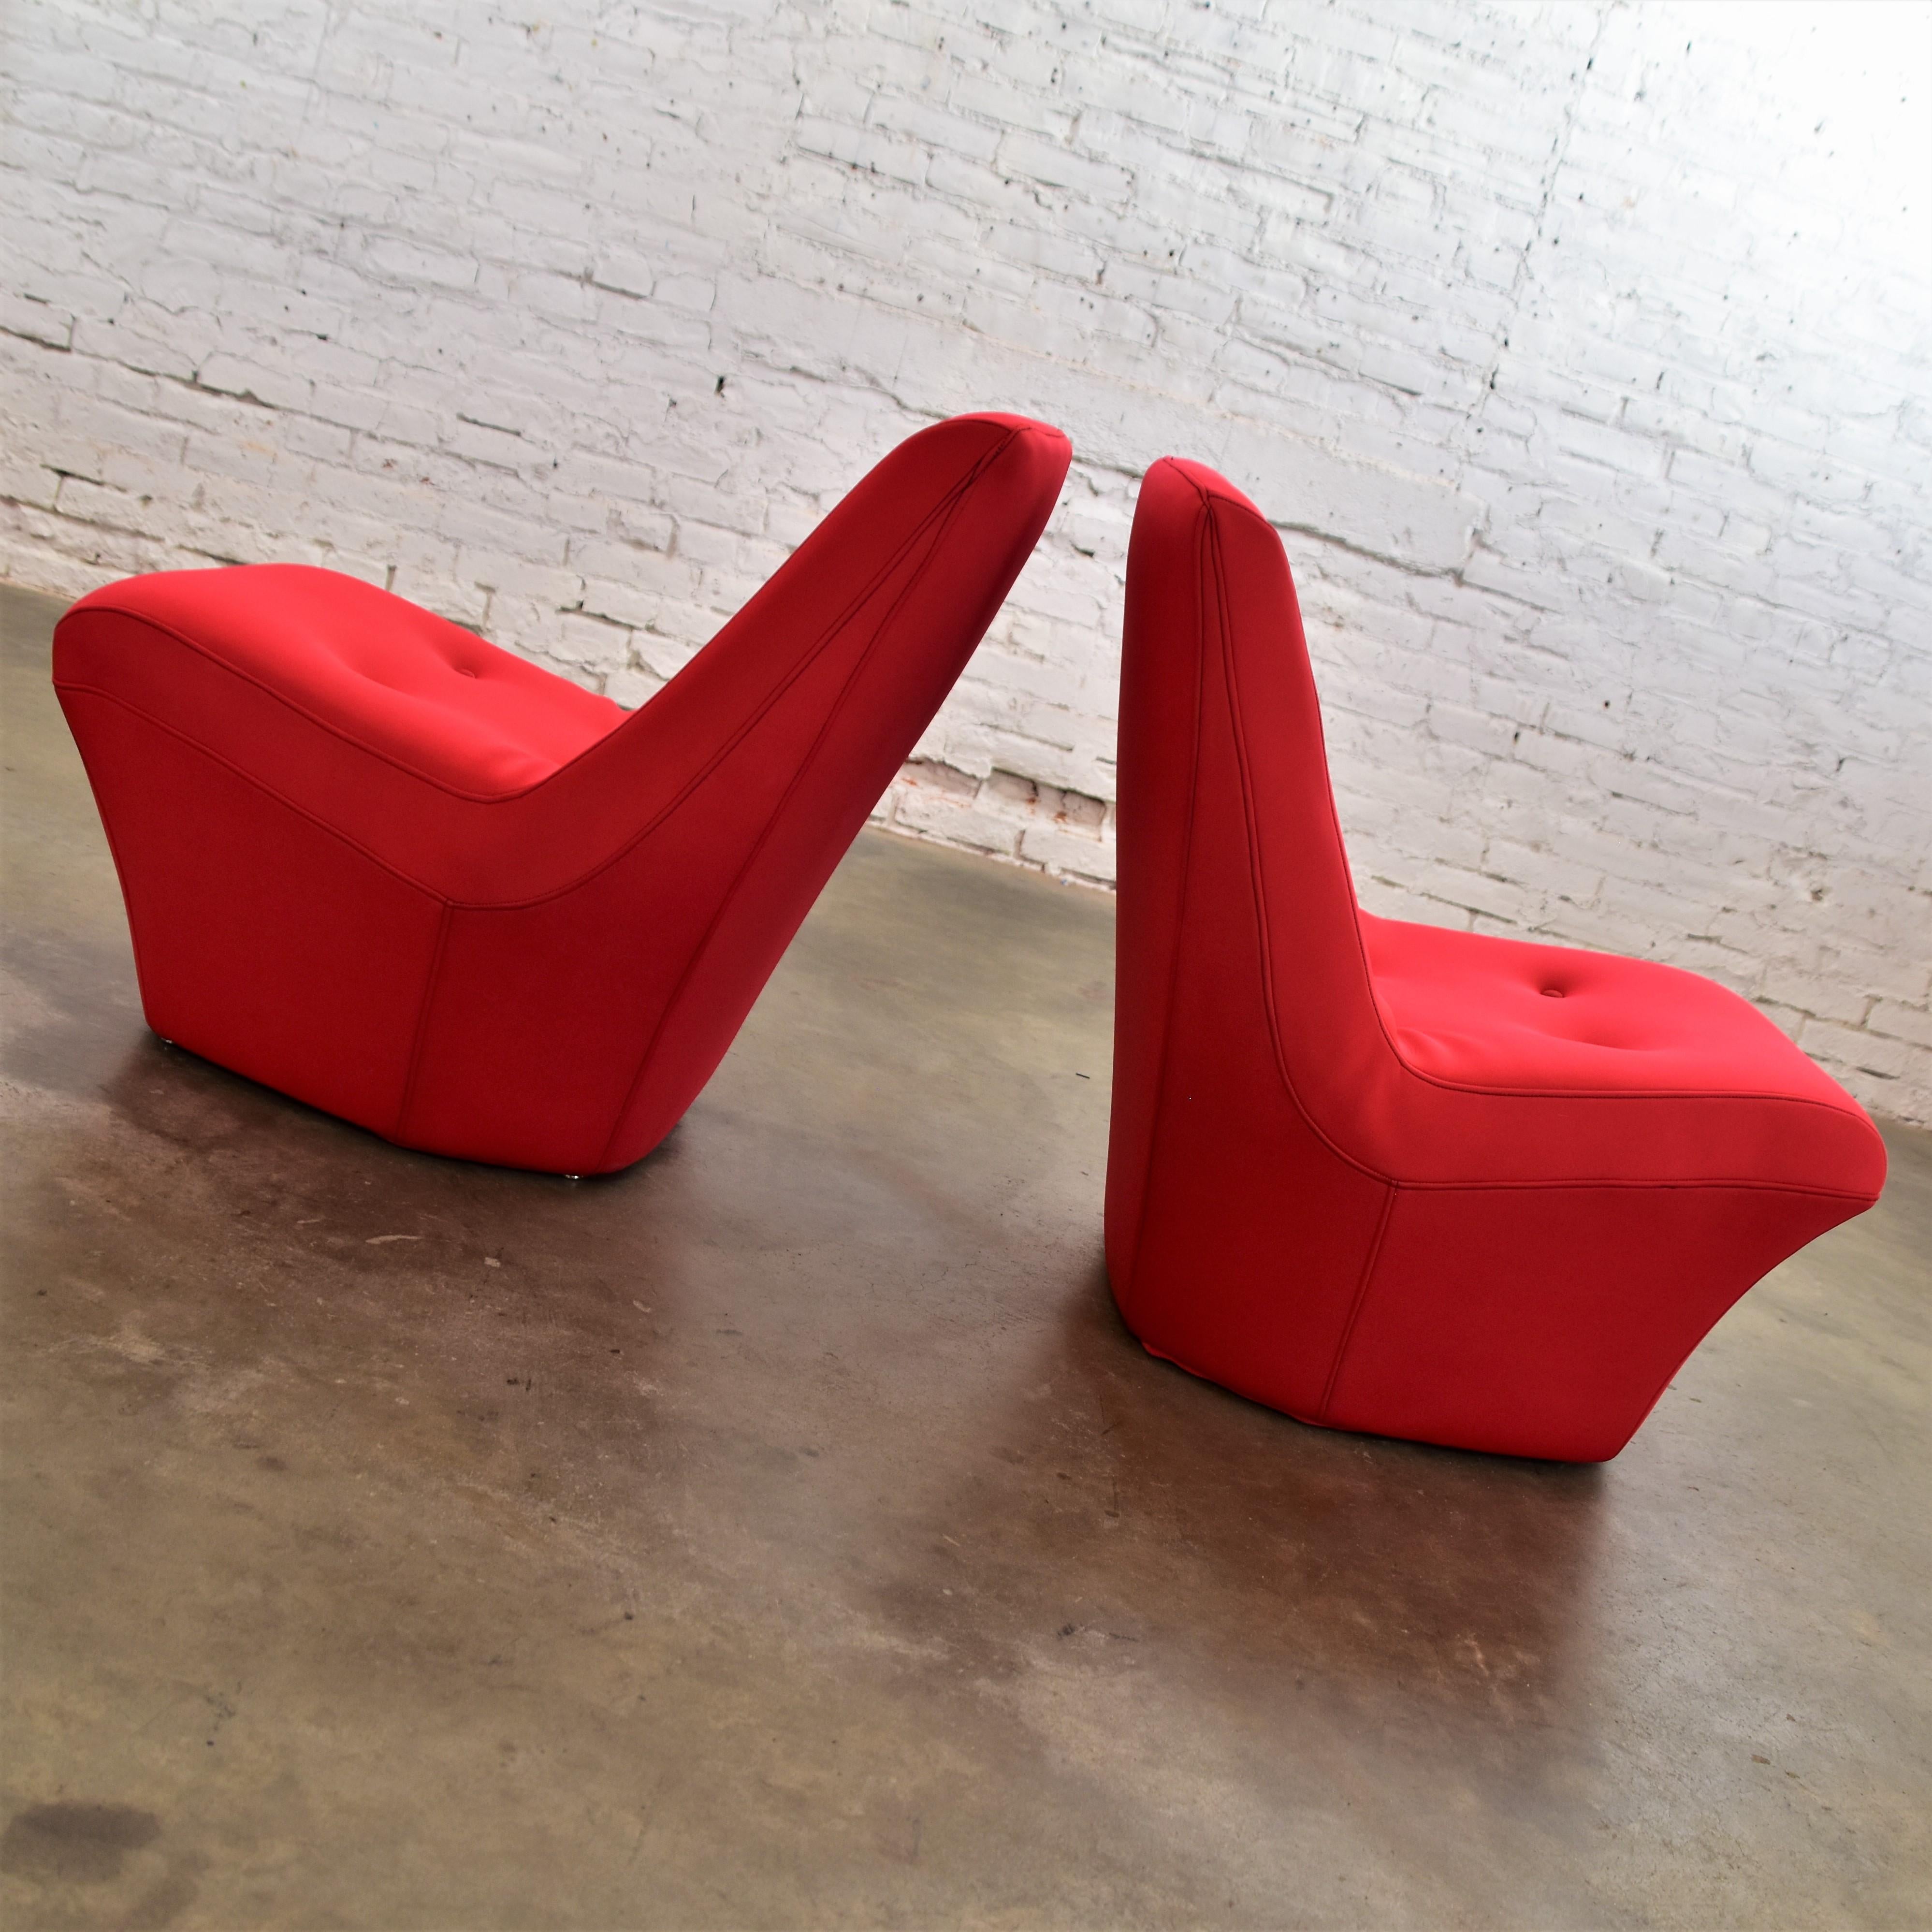 20th Century Mod Style Mid-Century Modern Red Neoprene Fabric Slipper Chairs by Founders Furn